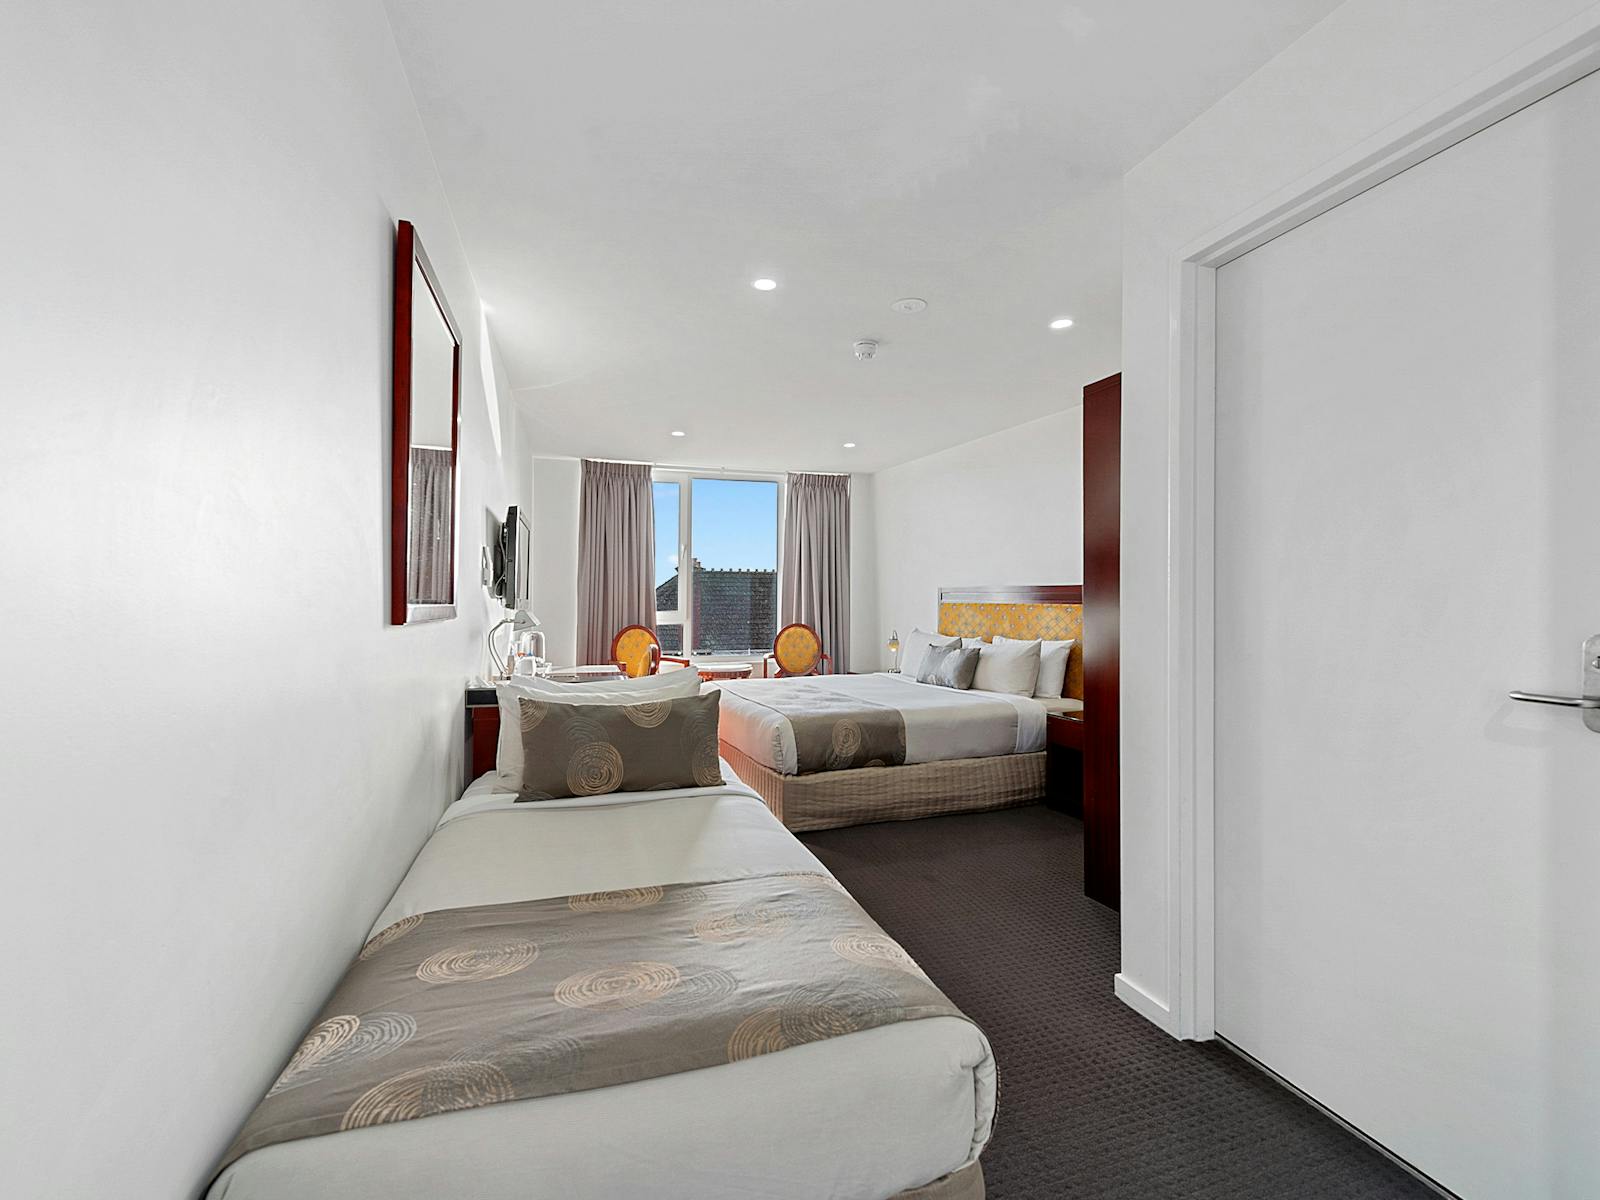 Twin Room is the only room accommodating three people - one king size bed and one single bed.